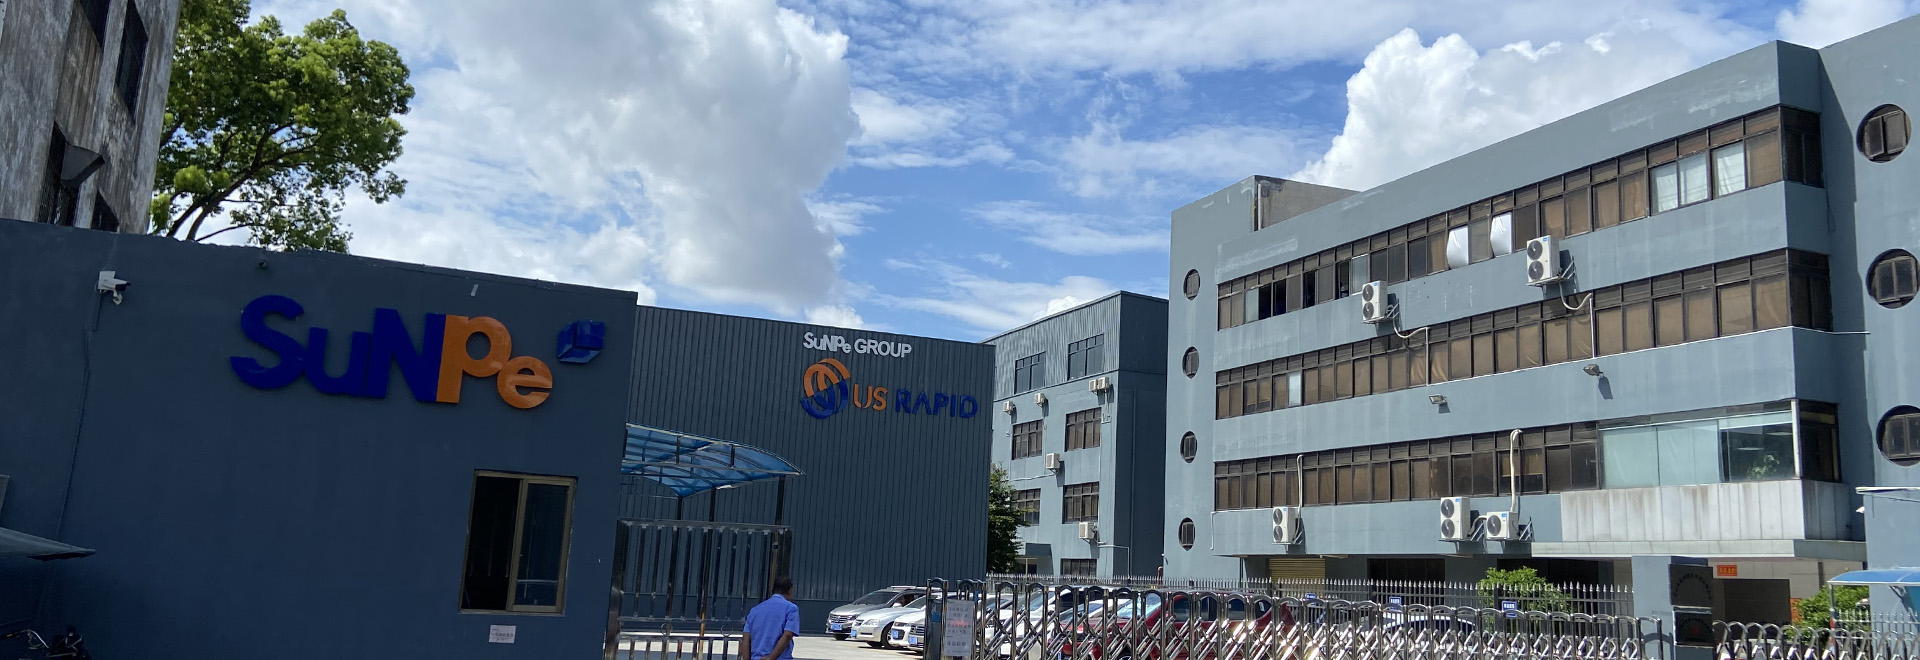 4 Standard Factories to Support SuNPe's Business